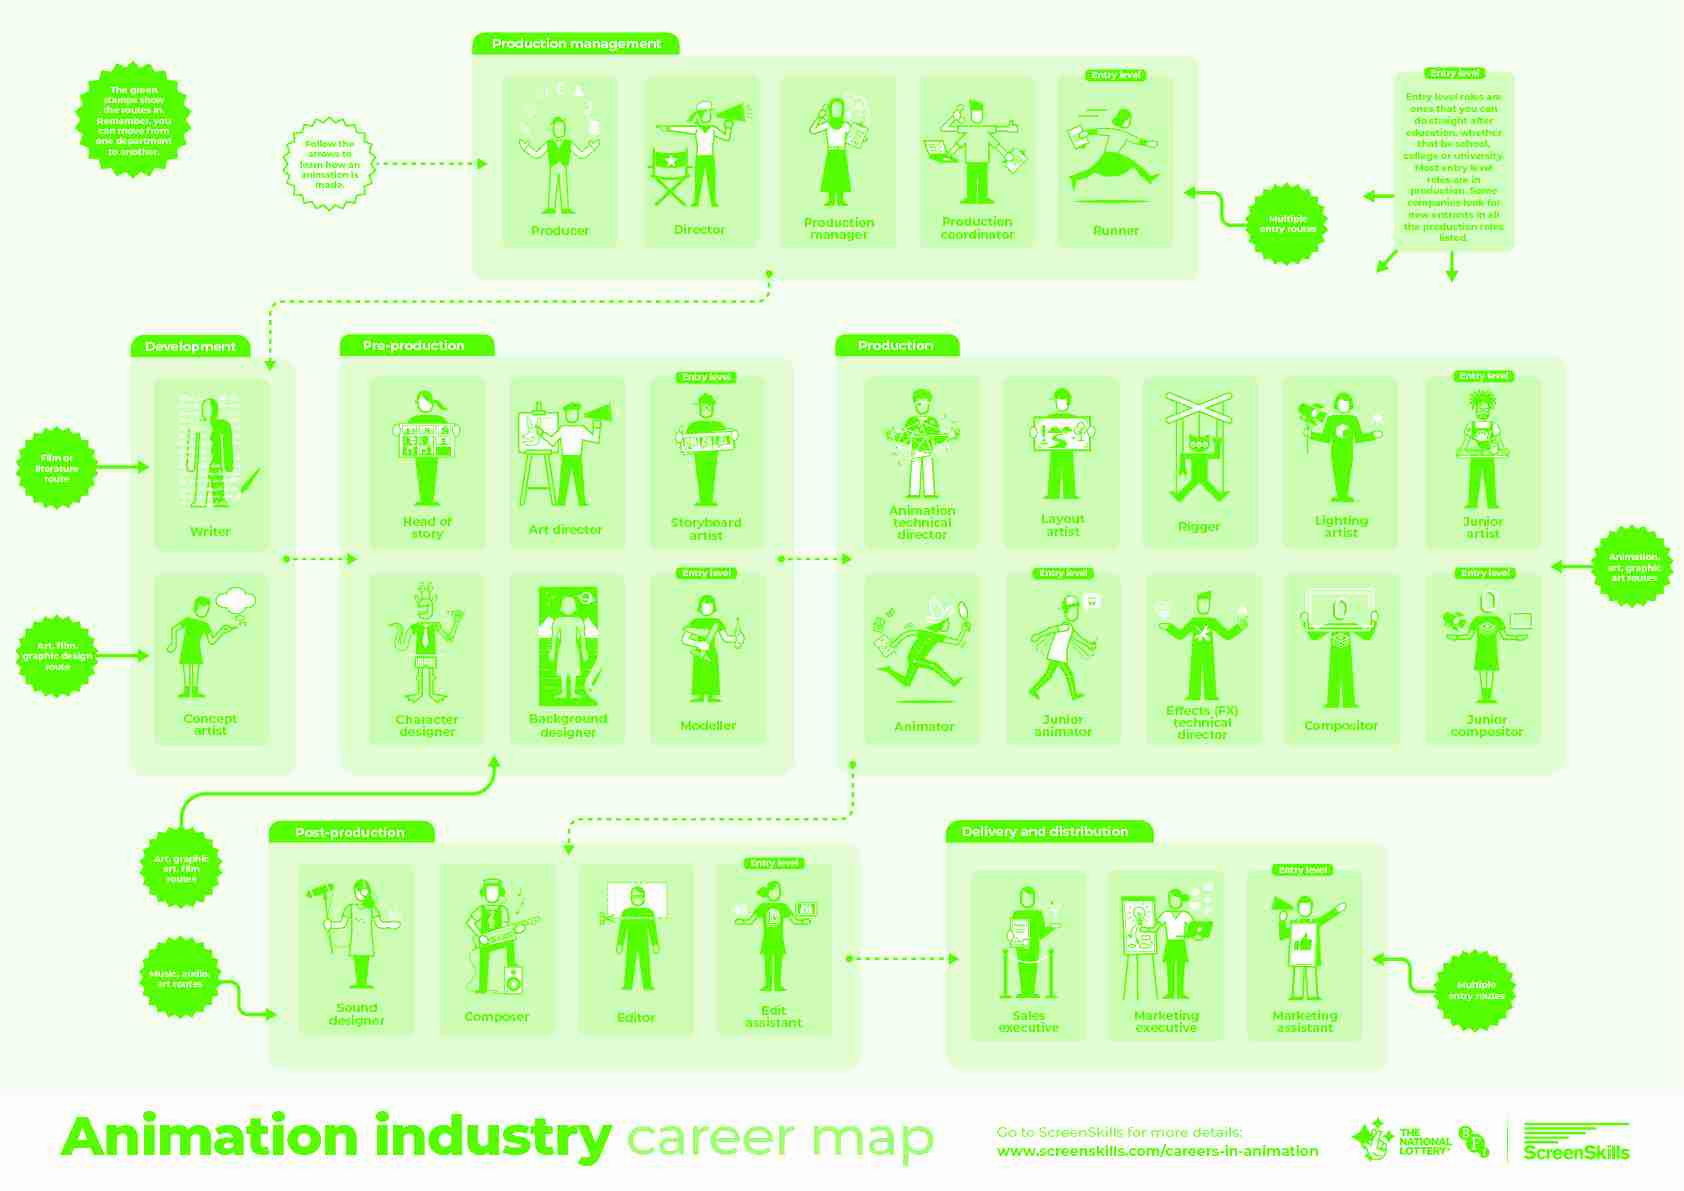 Animation industry career map Go to ScreenSkills for more details